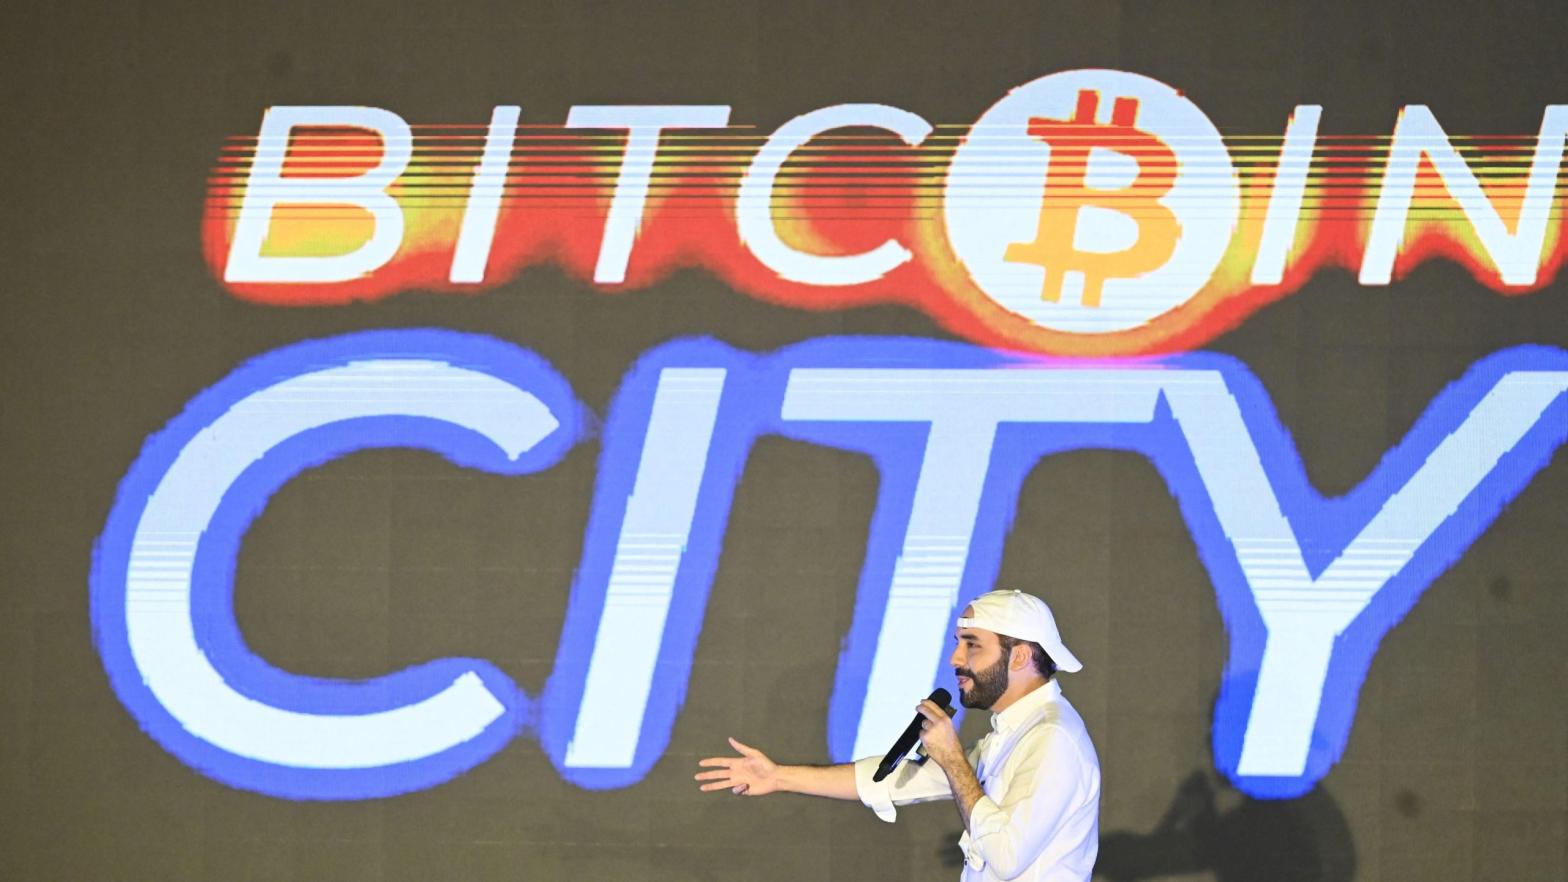 The president of El Salvador, Nayib Bukele, gestures during his speech at the closing ceremony of the Latin Bitcoin Conference at Mizata Beach on November 20, 2021.  (Photo: Marvin Recinos / AFP, Getty Images)